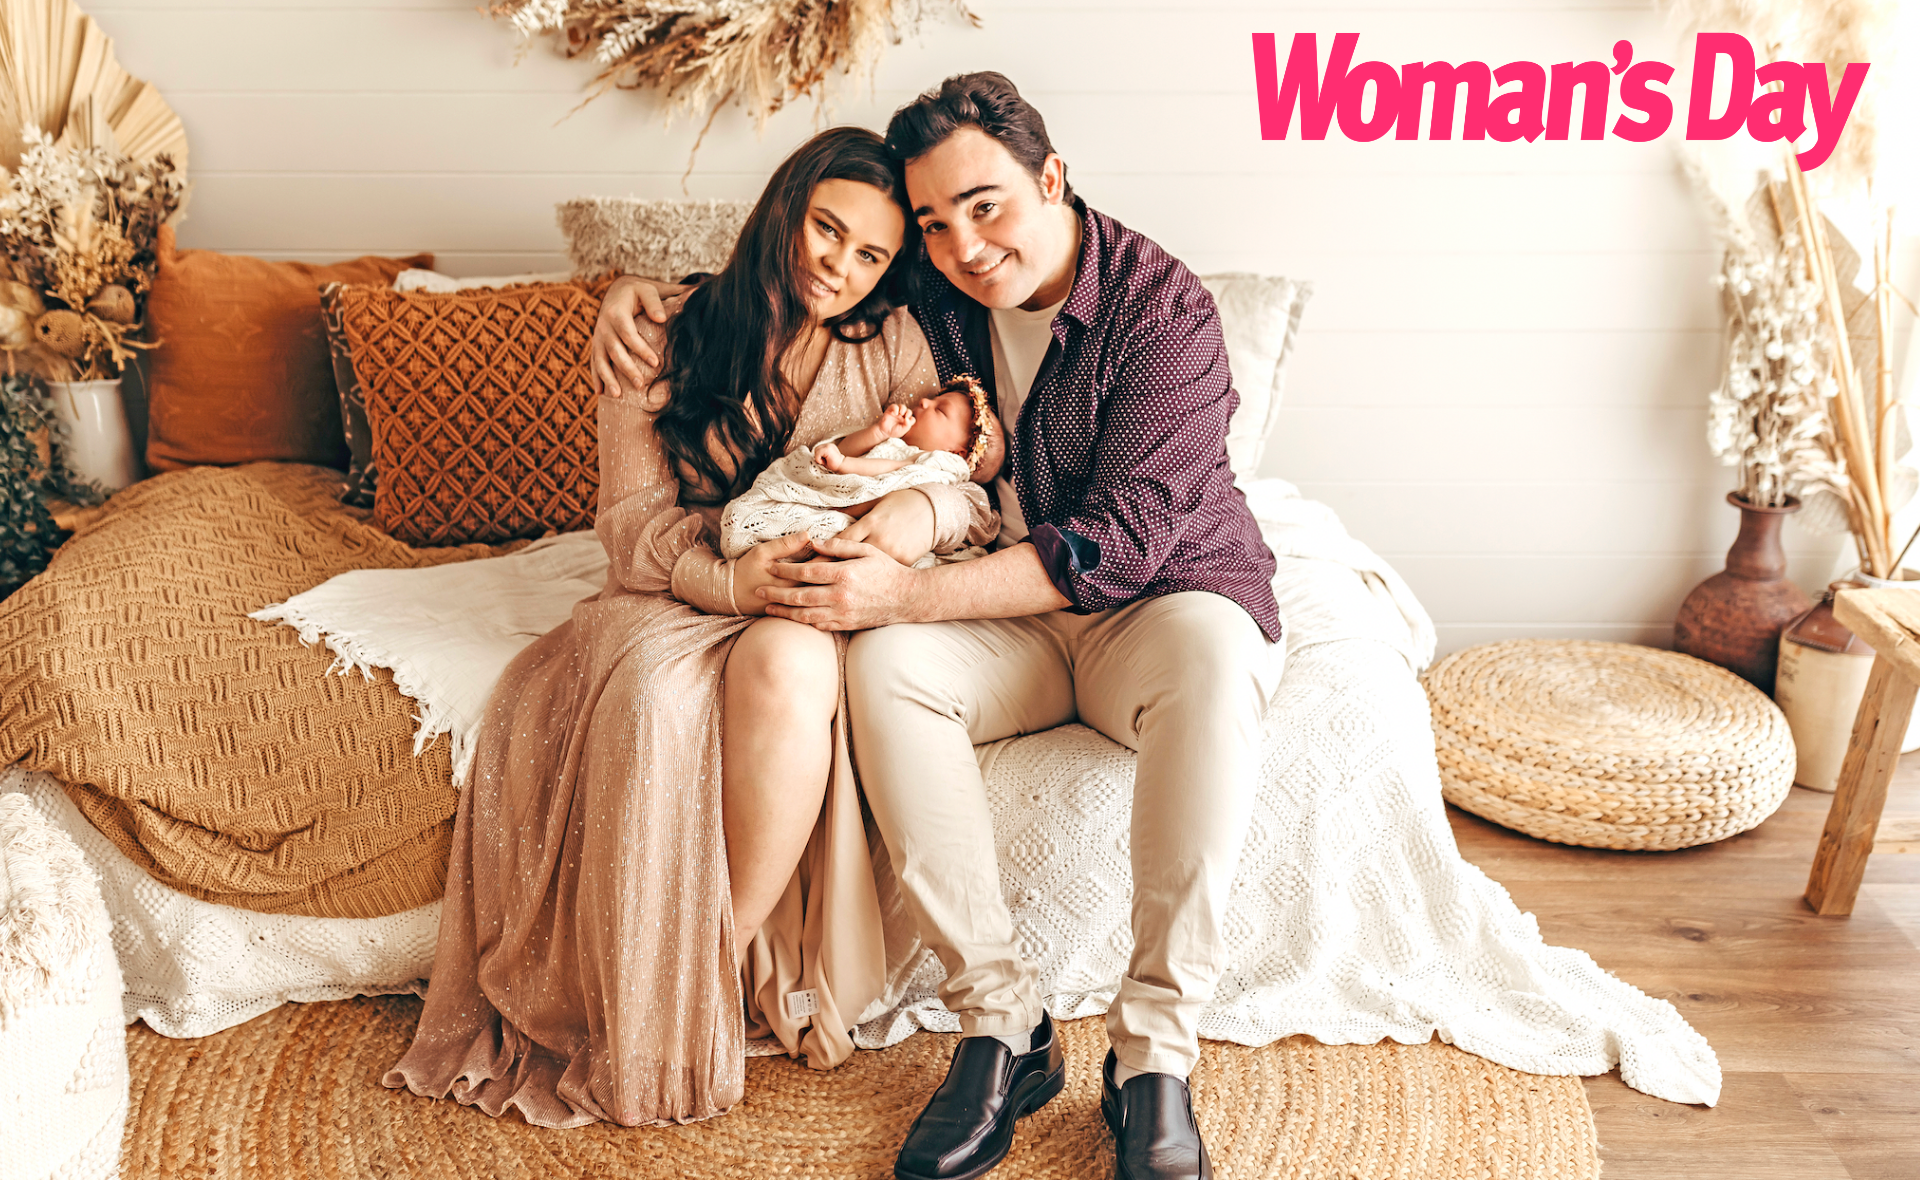 EXCLUSIVE: The X Factor’s Jason Owen reveals how baby daughter Lyla Rose has changed his life